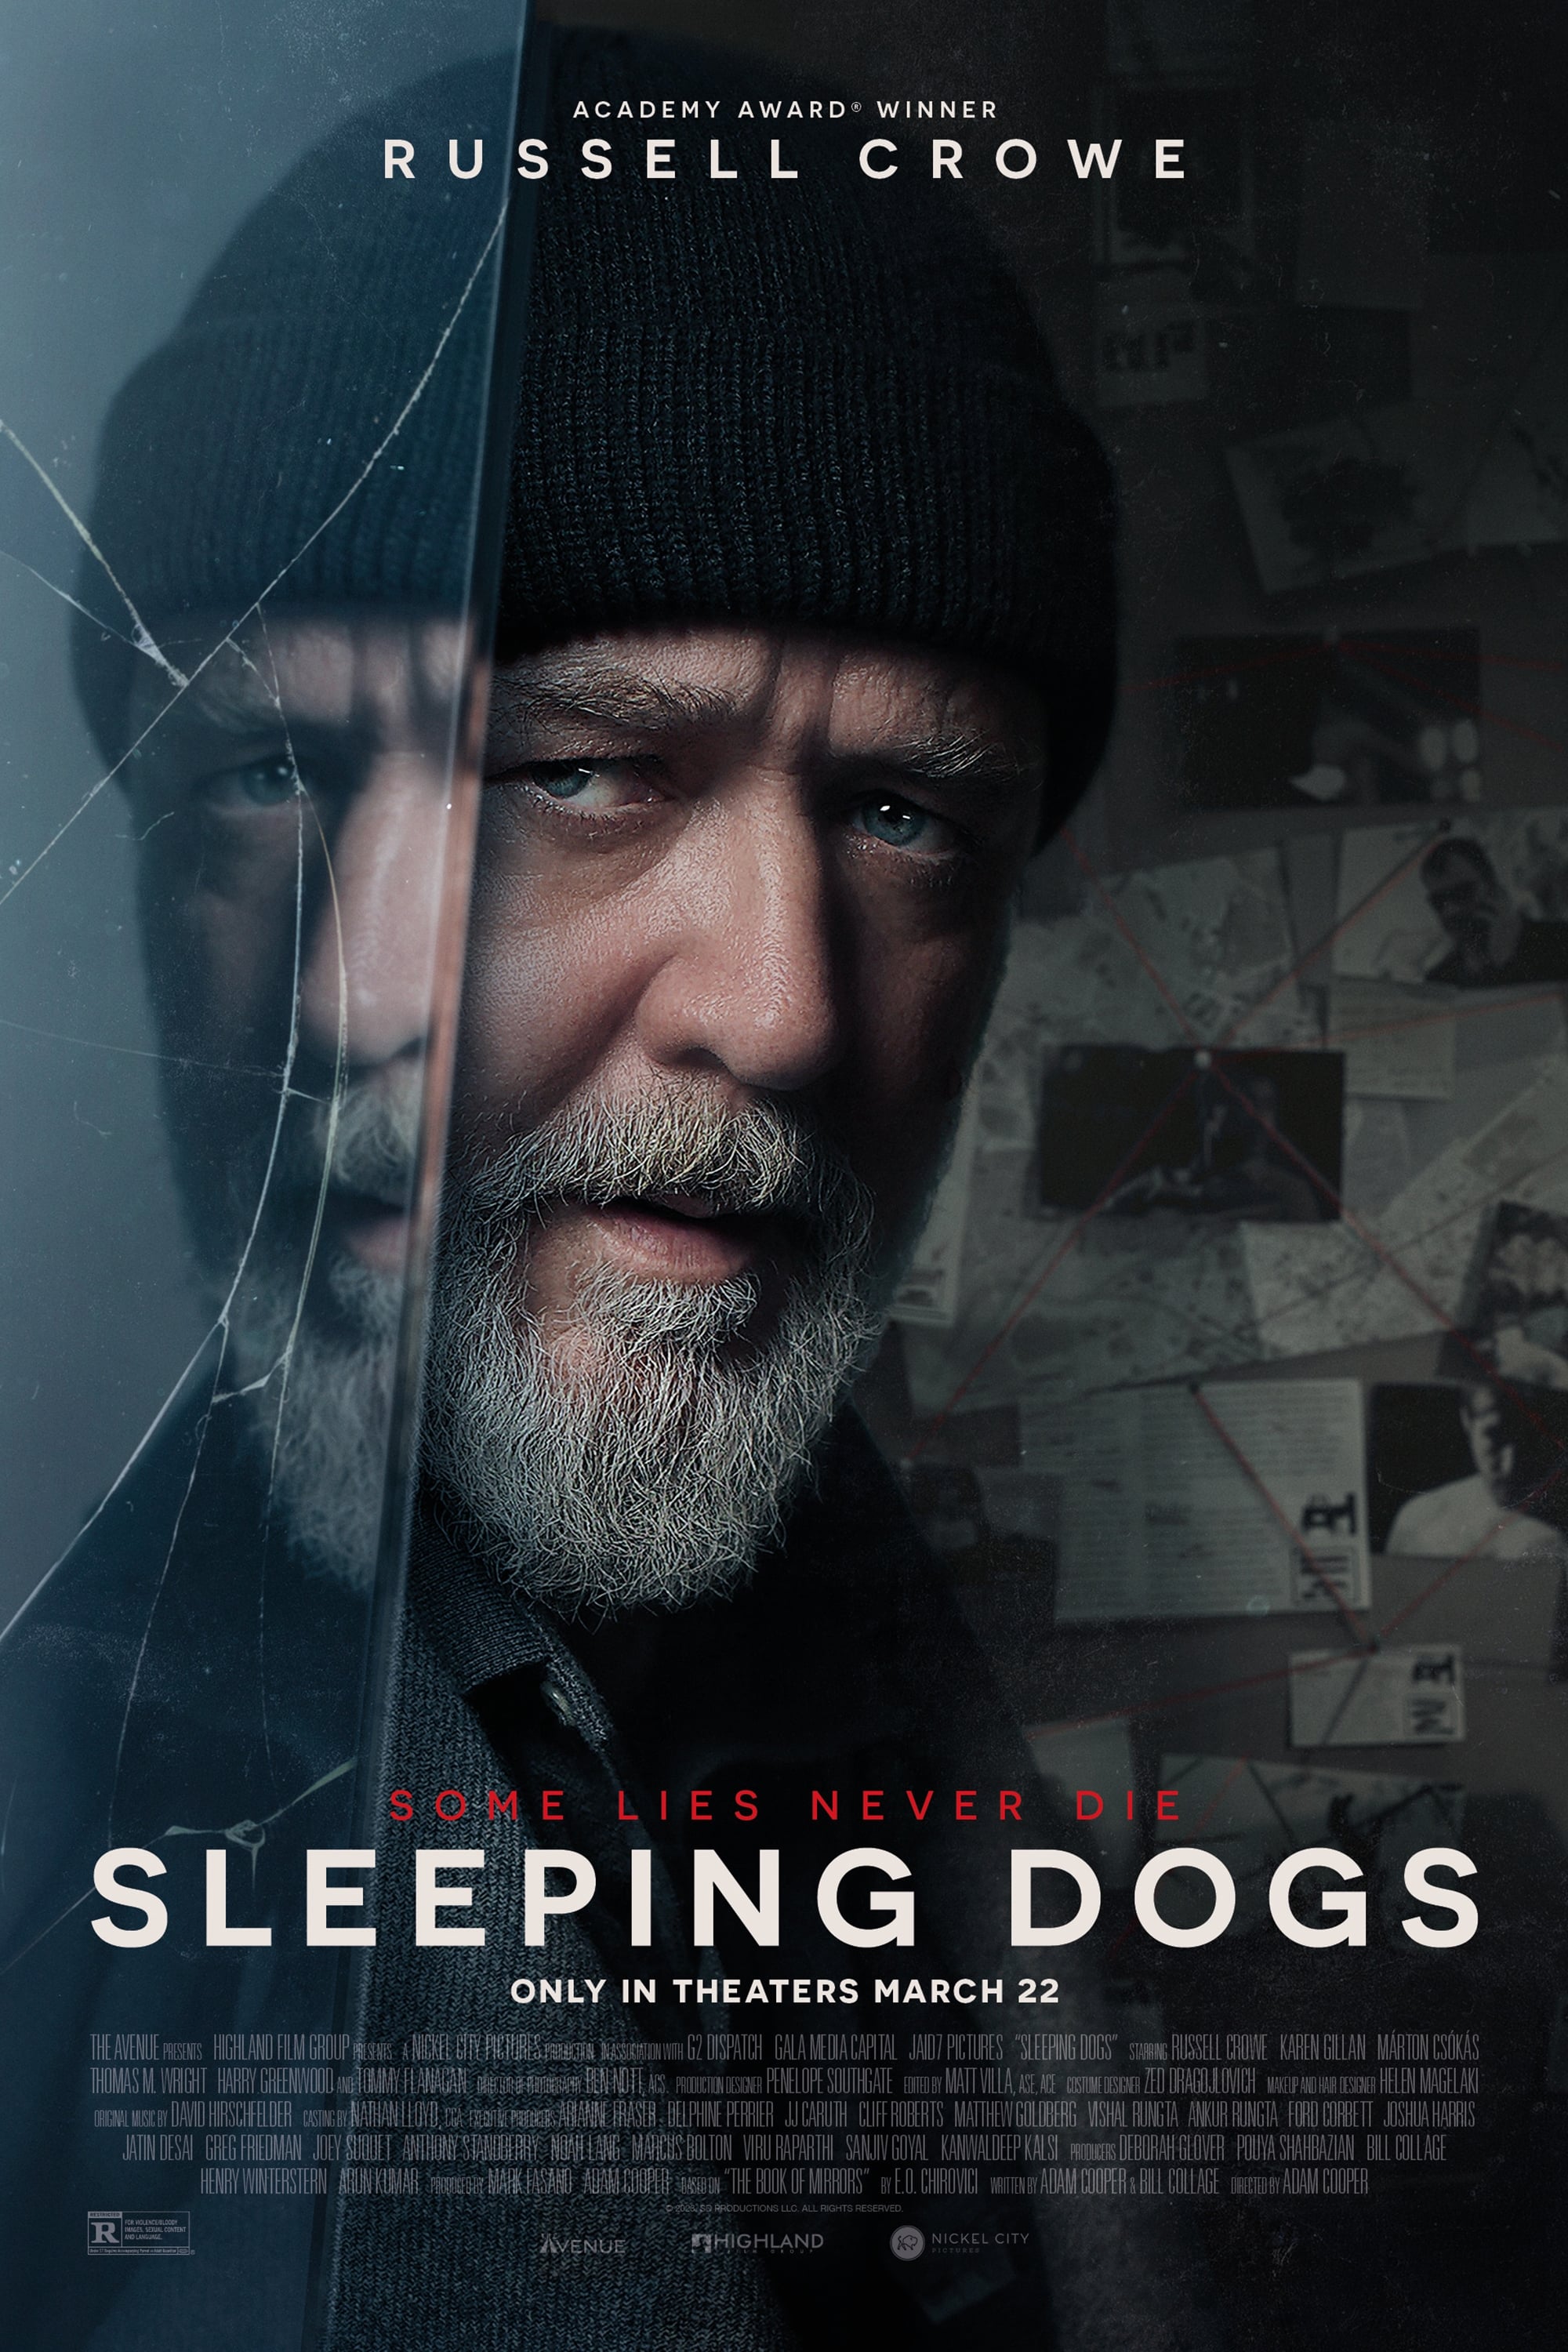 Poster for the movie "Sleeping Dogs"